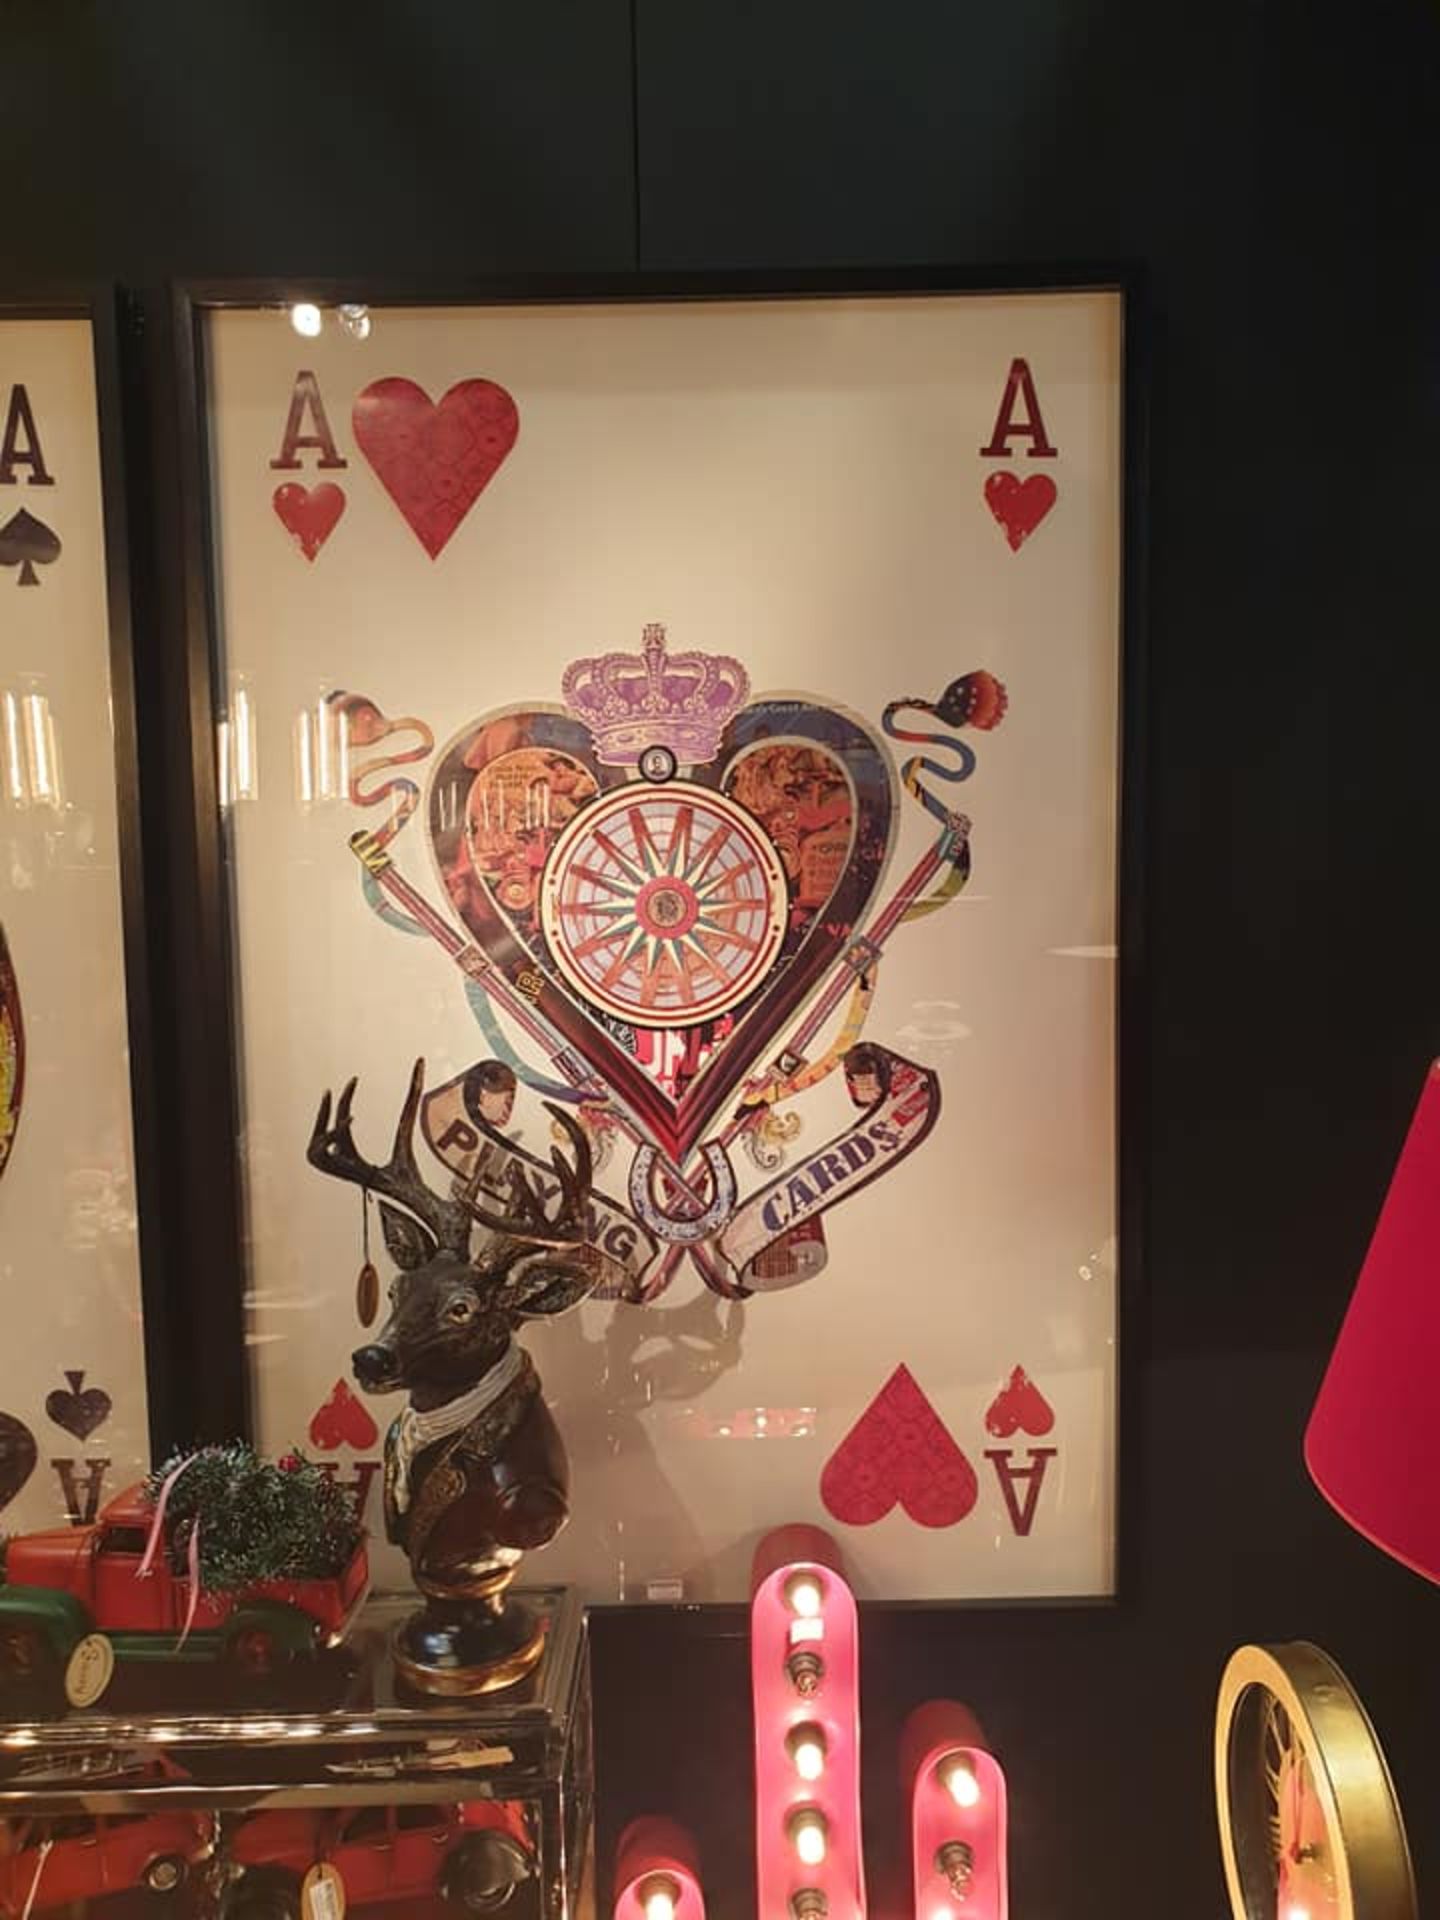 Framed Ace Of Hearts Wall Art Playful And Quirky, This Cards Art Line Is An Enlarged Version Of - Image 2 of 2